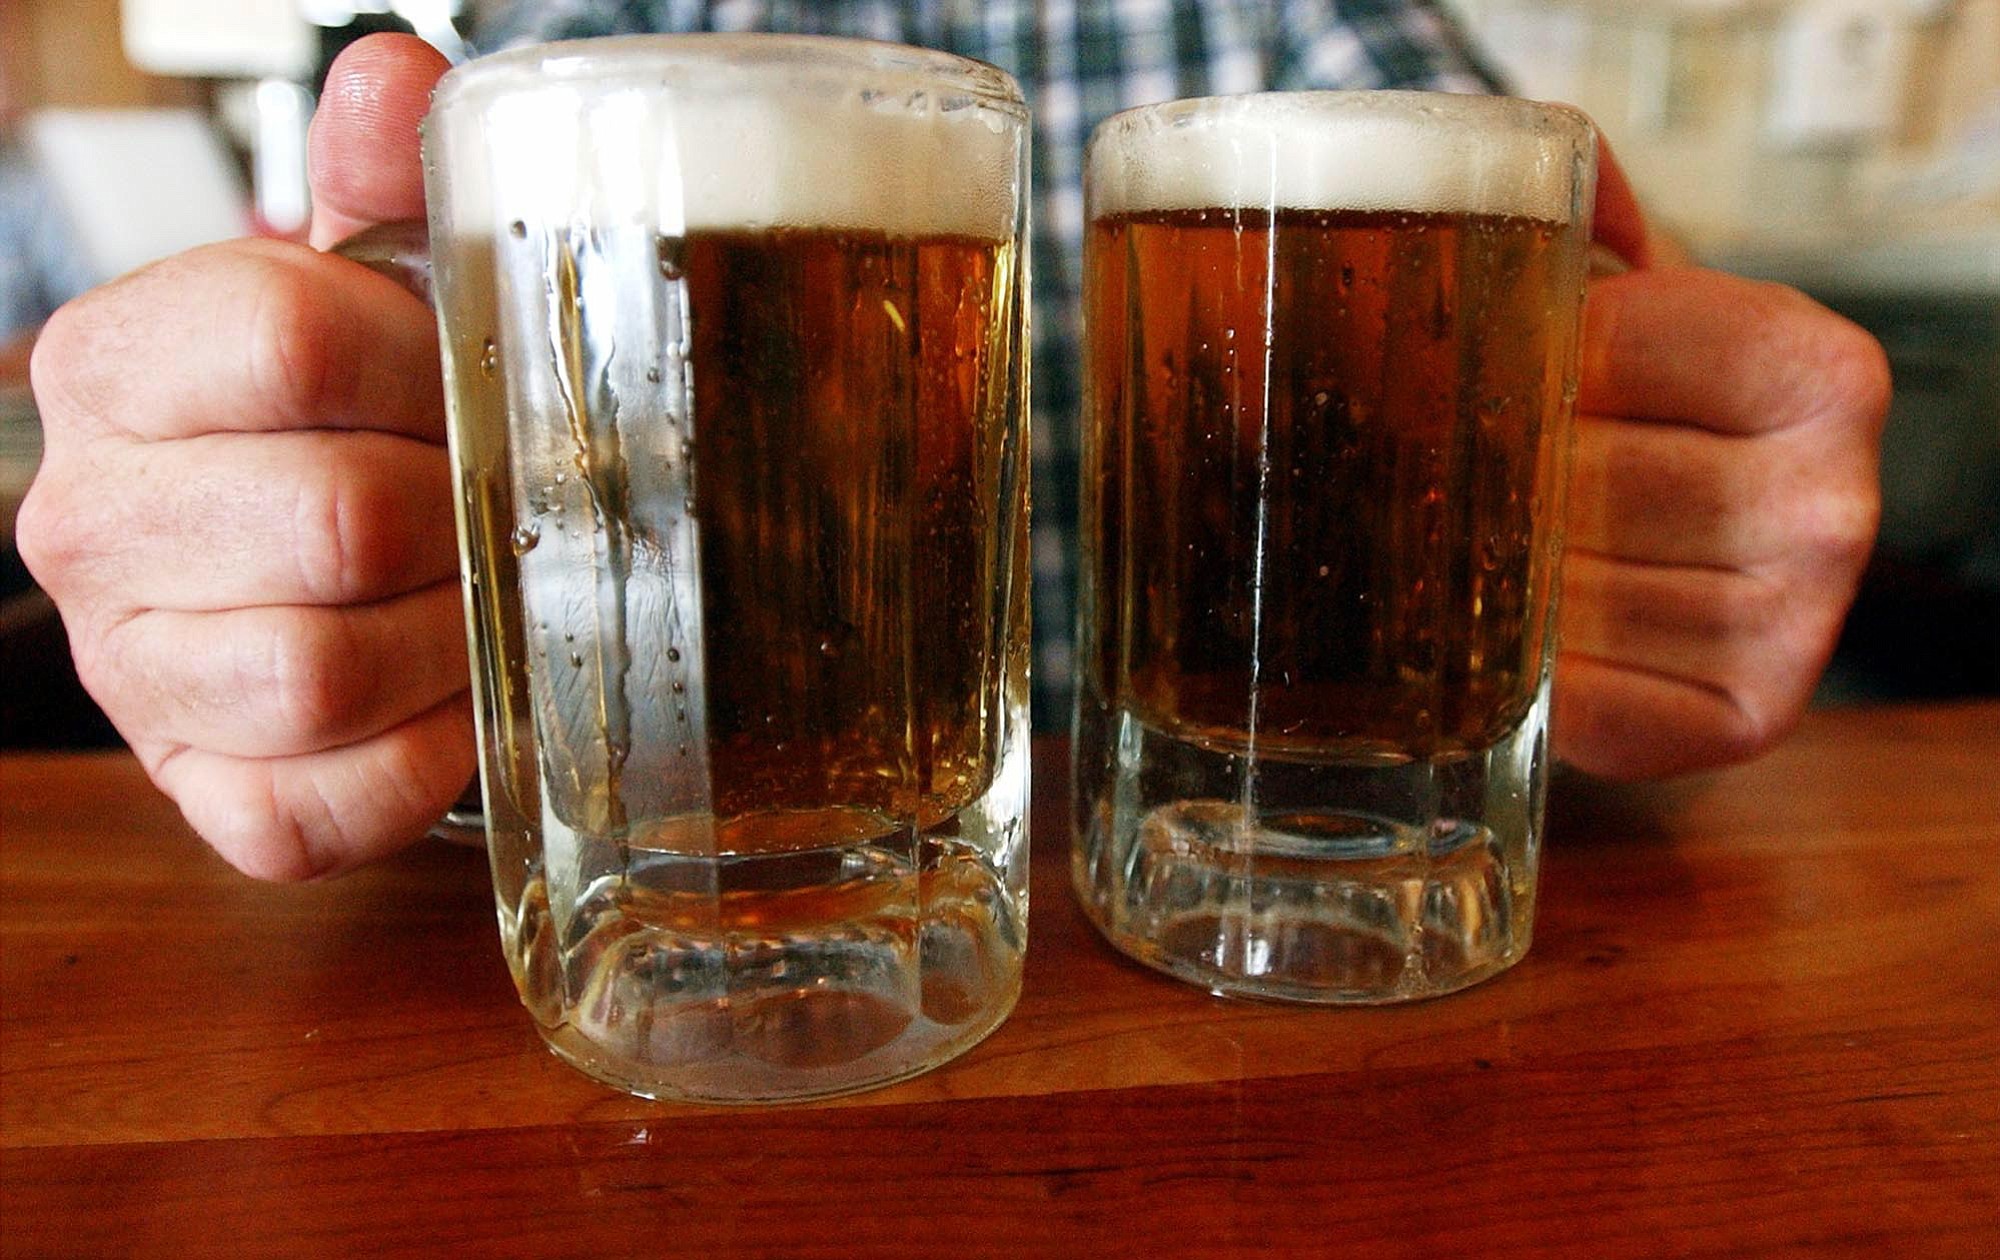 A bartender serves two mugs of beer at a tavern in Montpelier, Vt. Alcohol problems affect almost 33 million adults and most have never sought treatment.